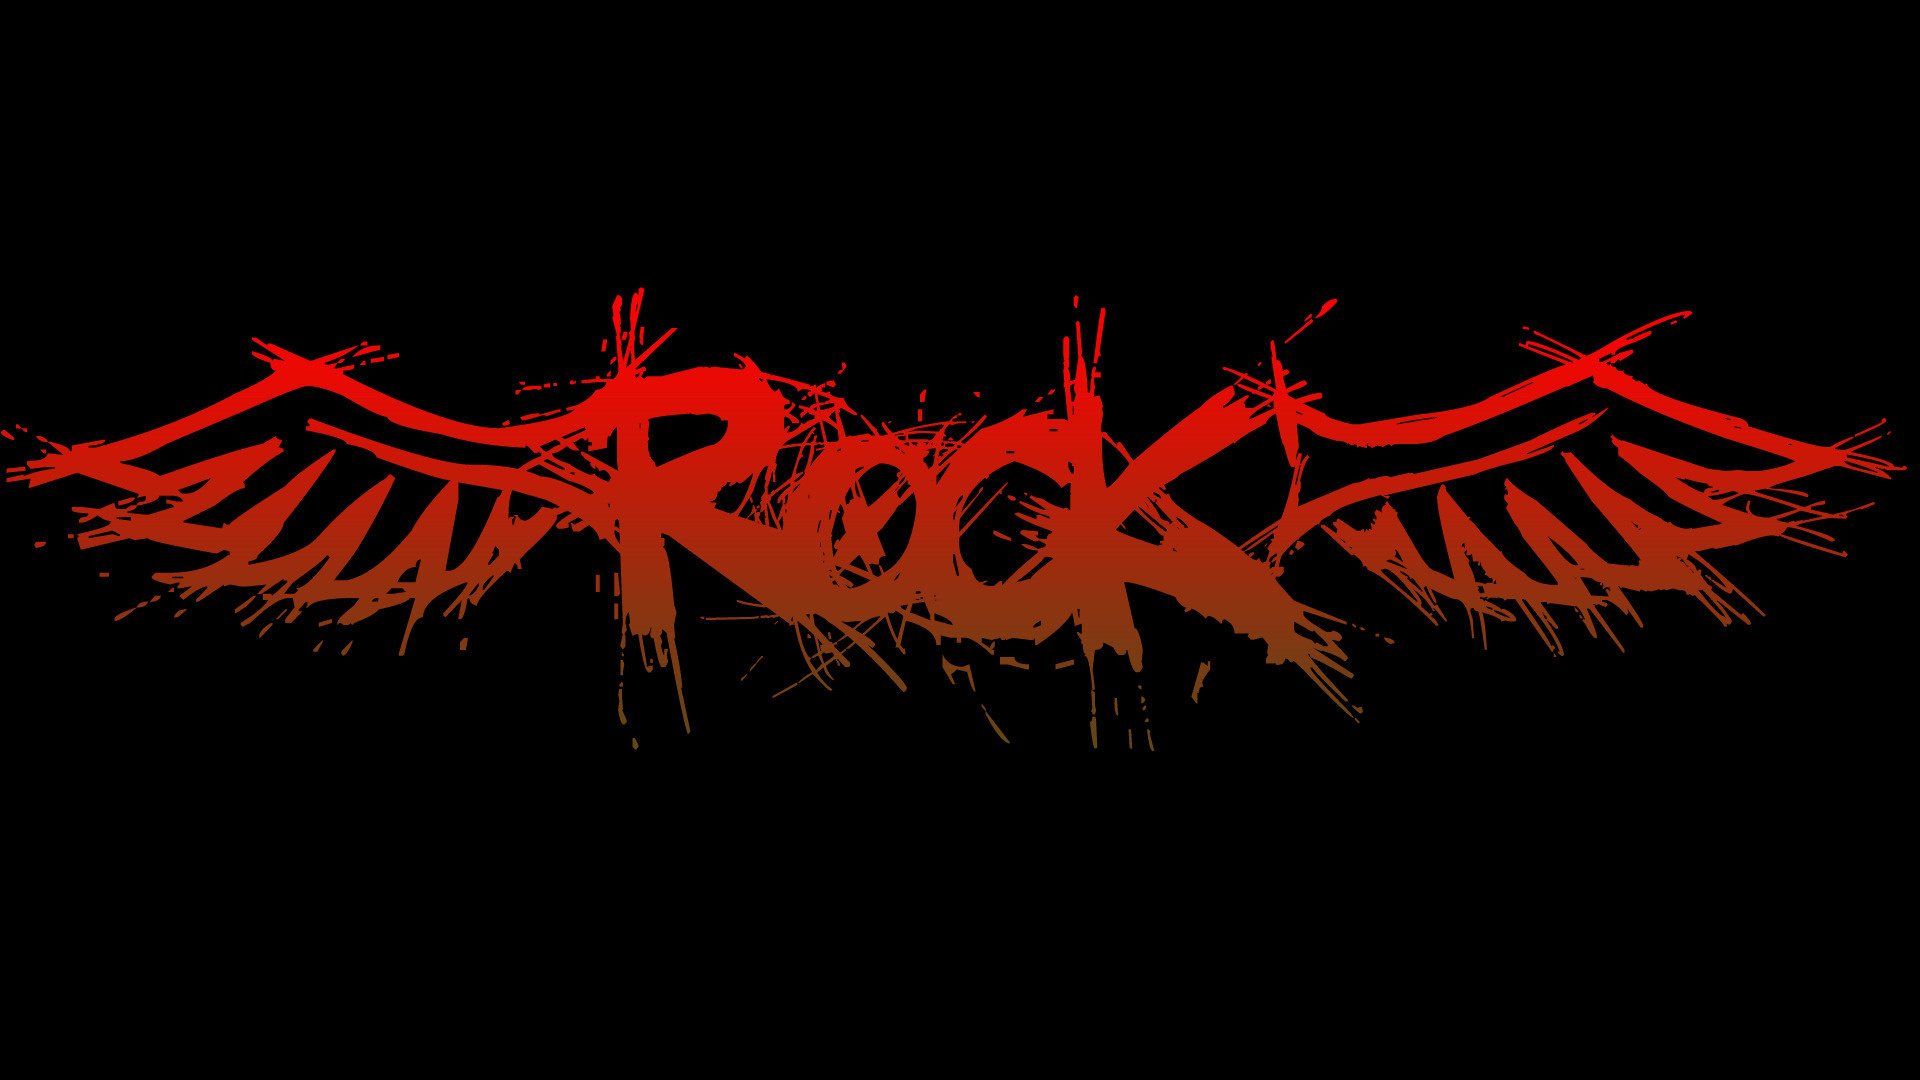 Rock music hd papers and backgrounds